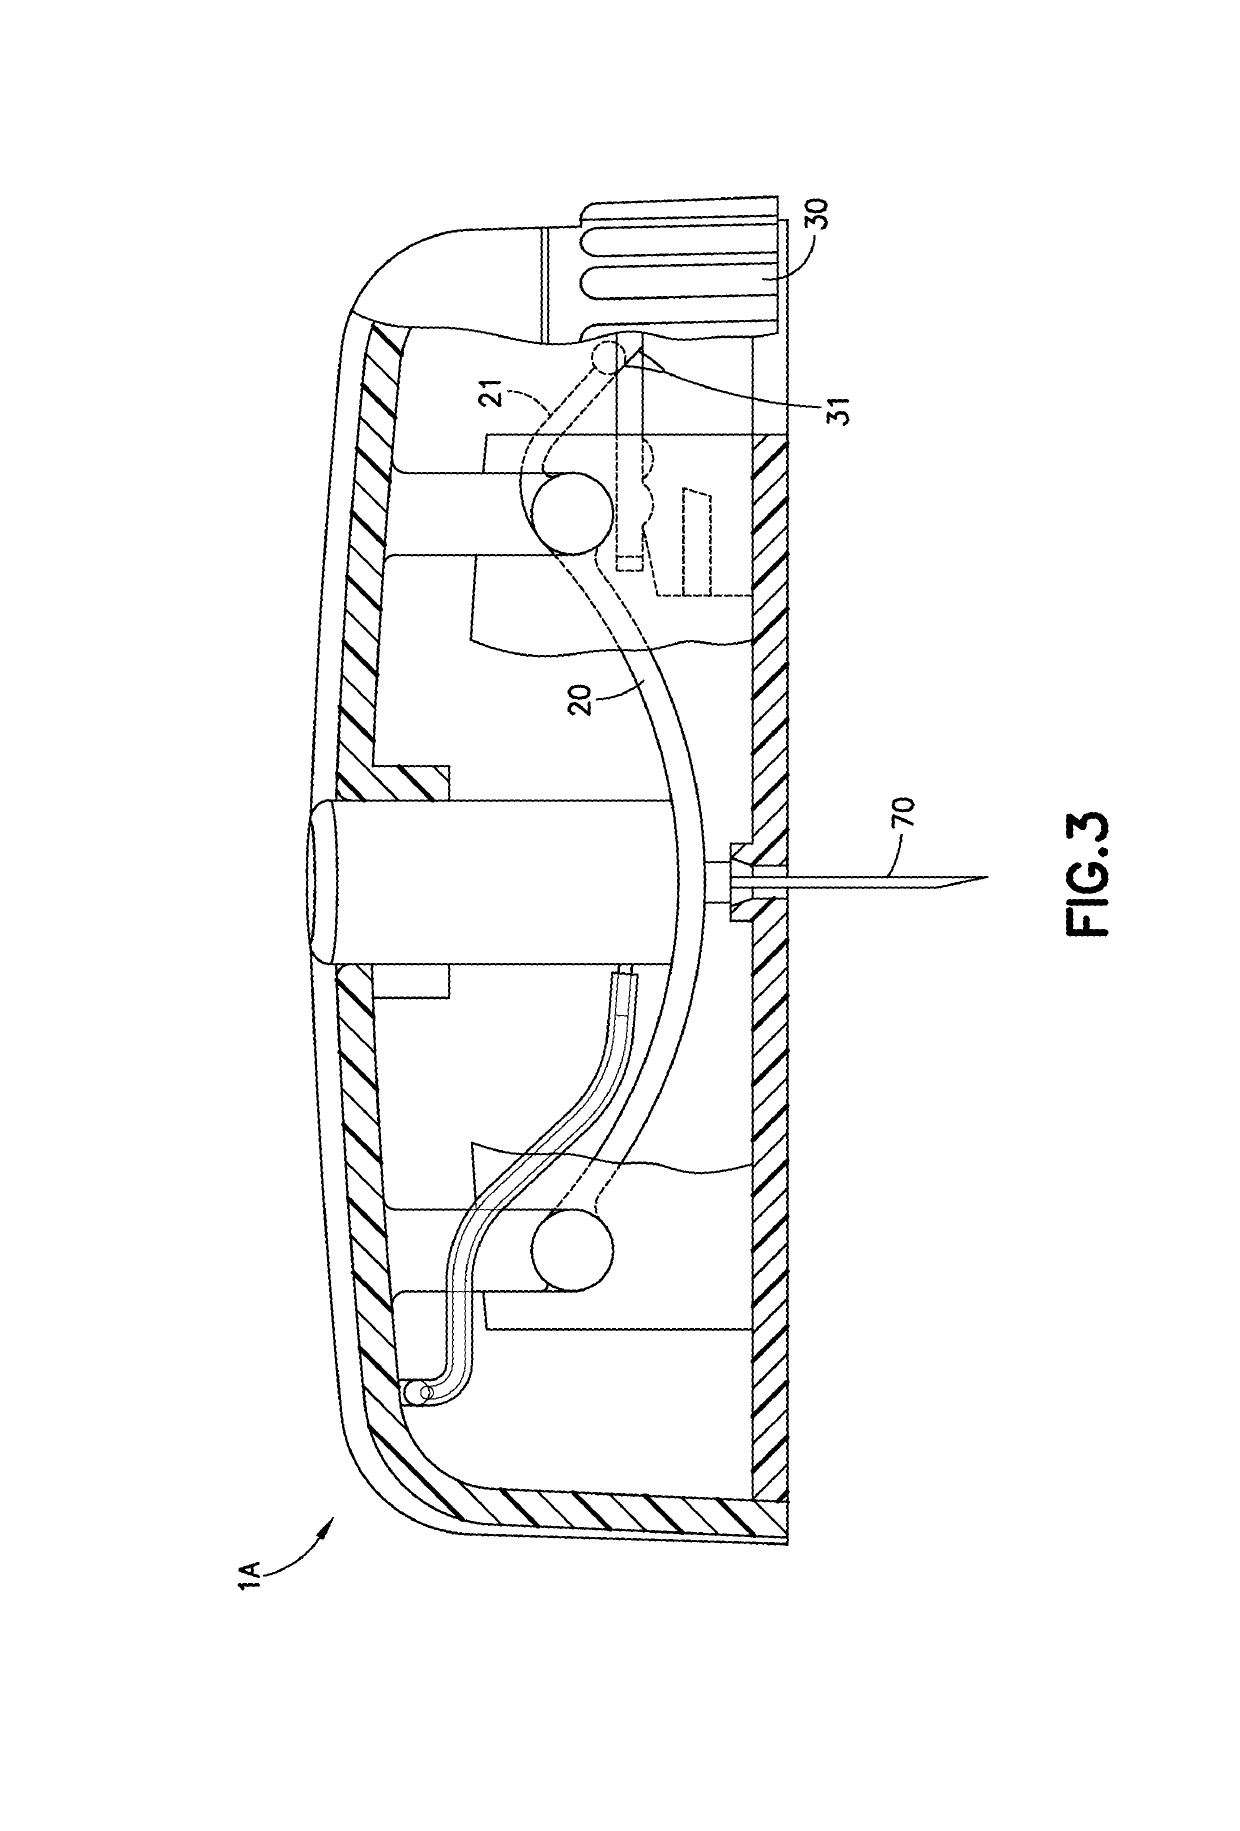 Cannula insertion and retraction device for infusion device